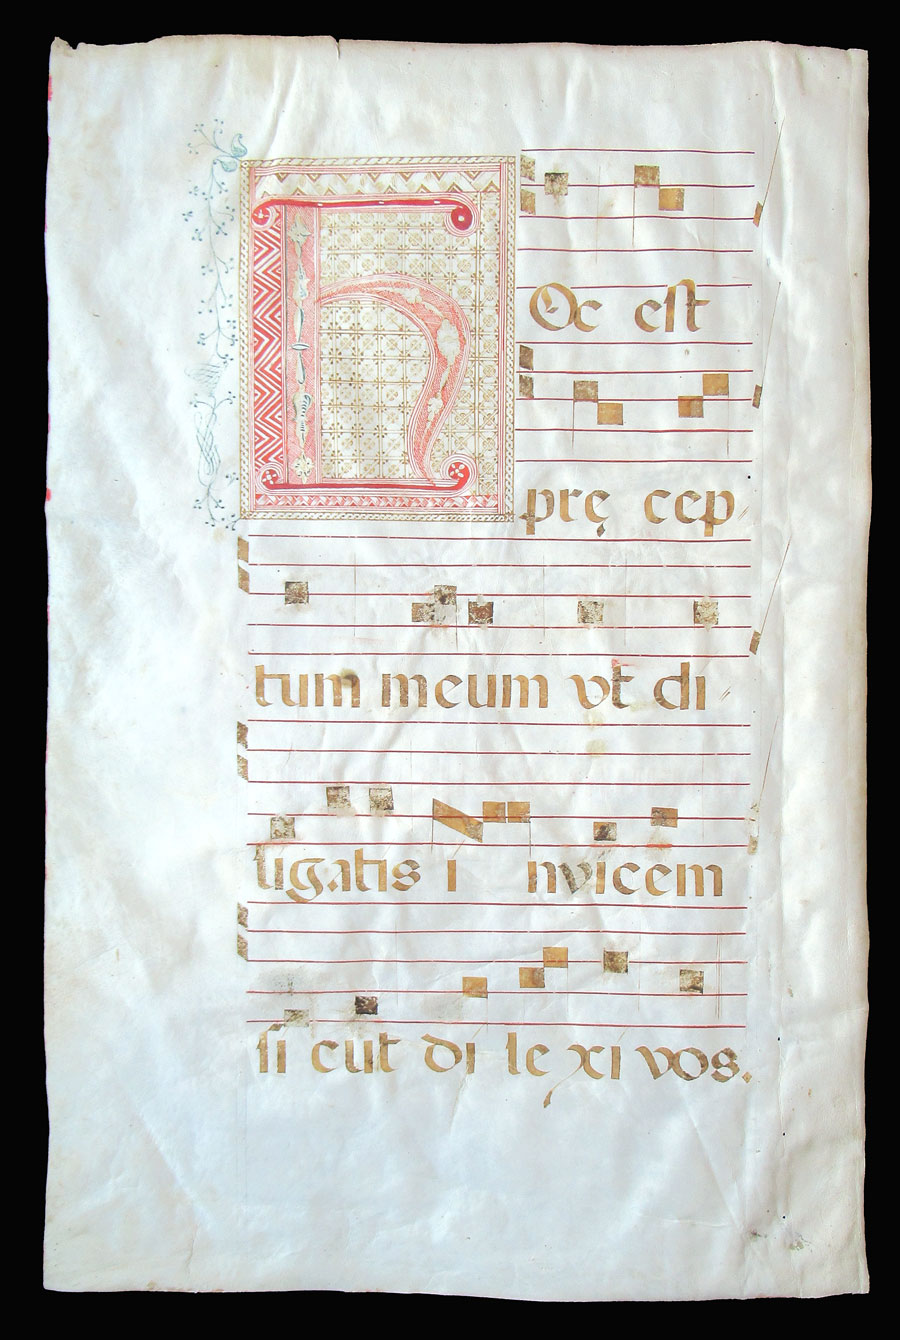 c 1600 Gregorian Chant - Love one another as I have loved you